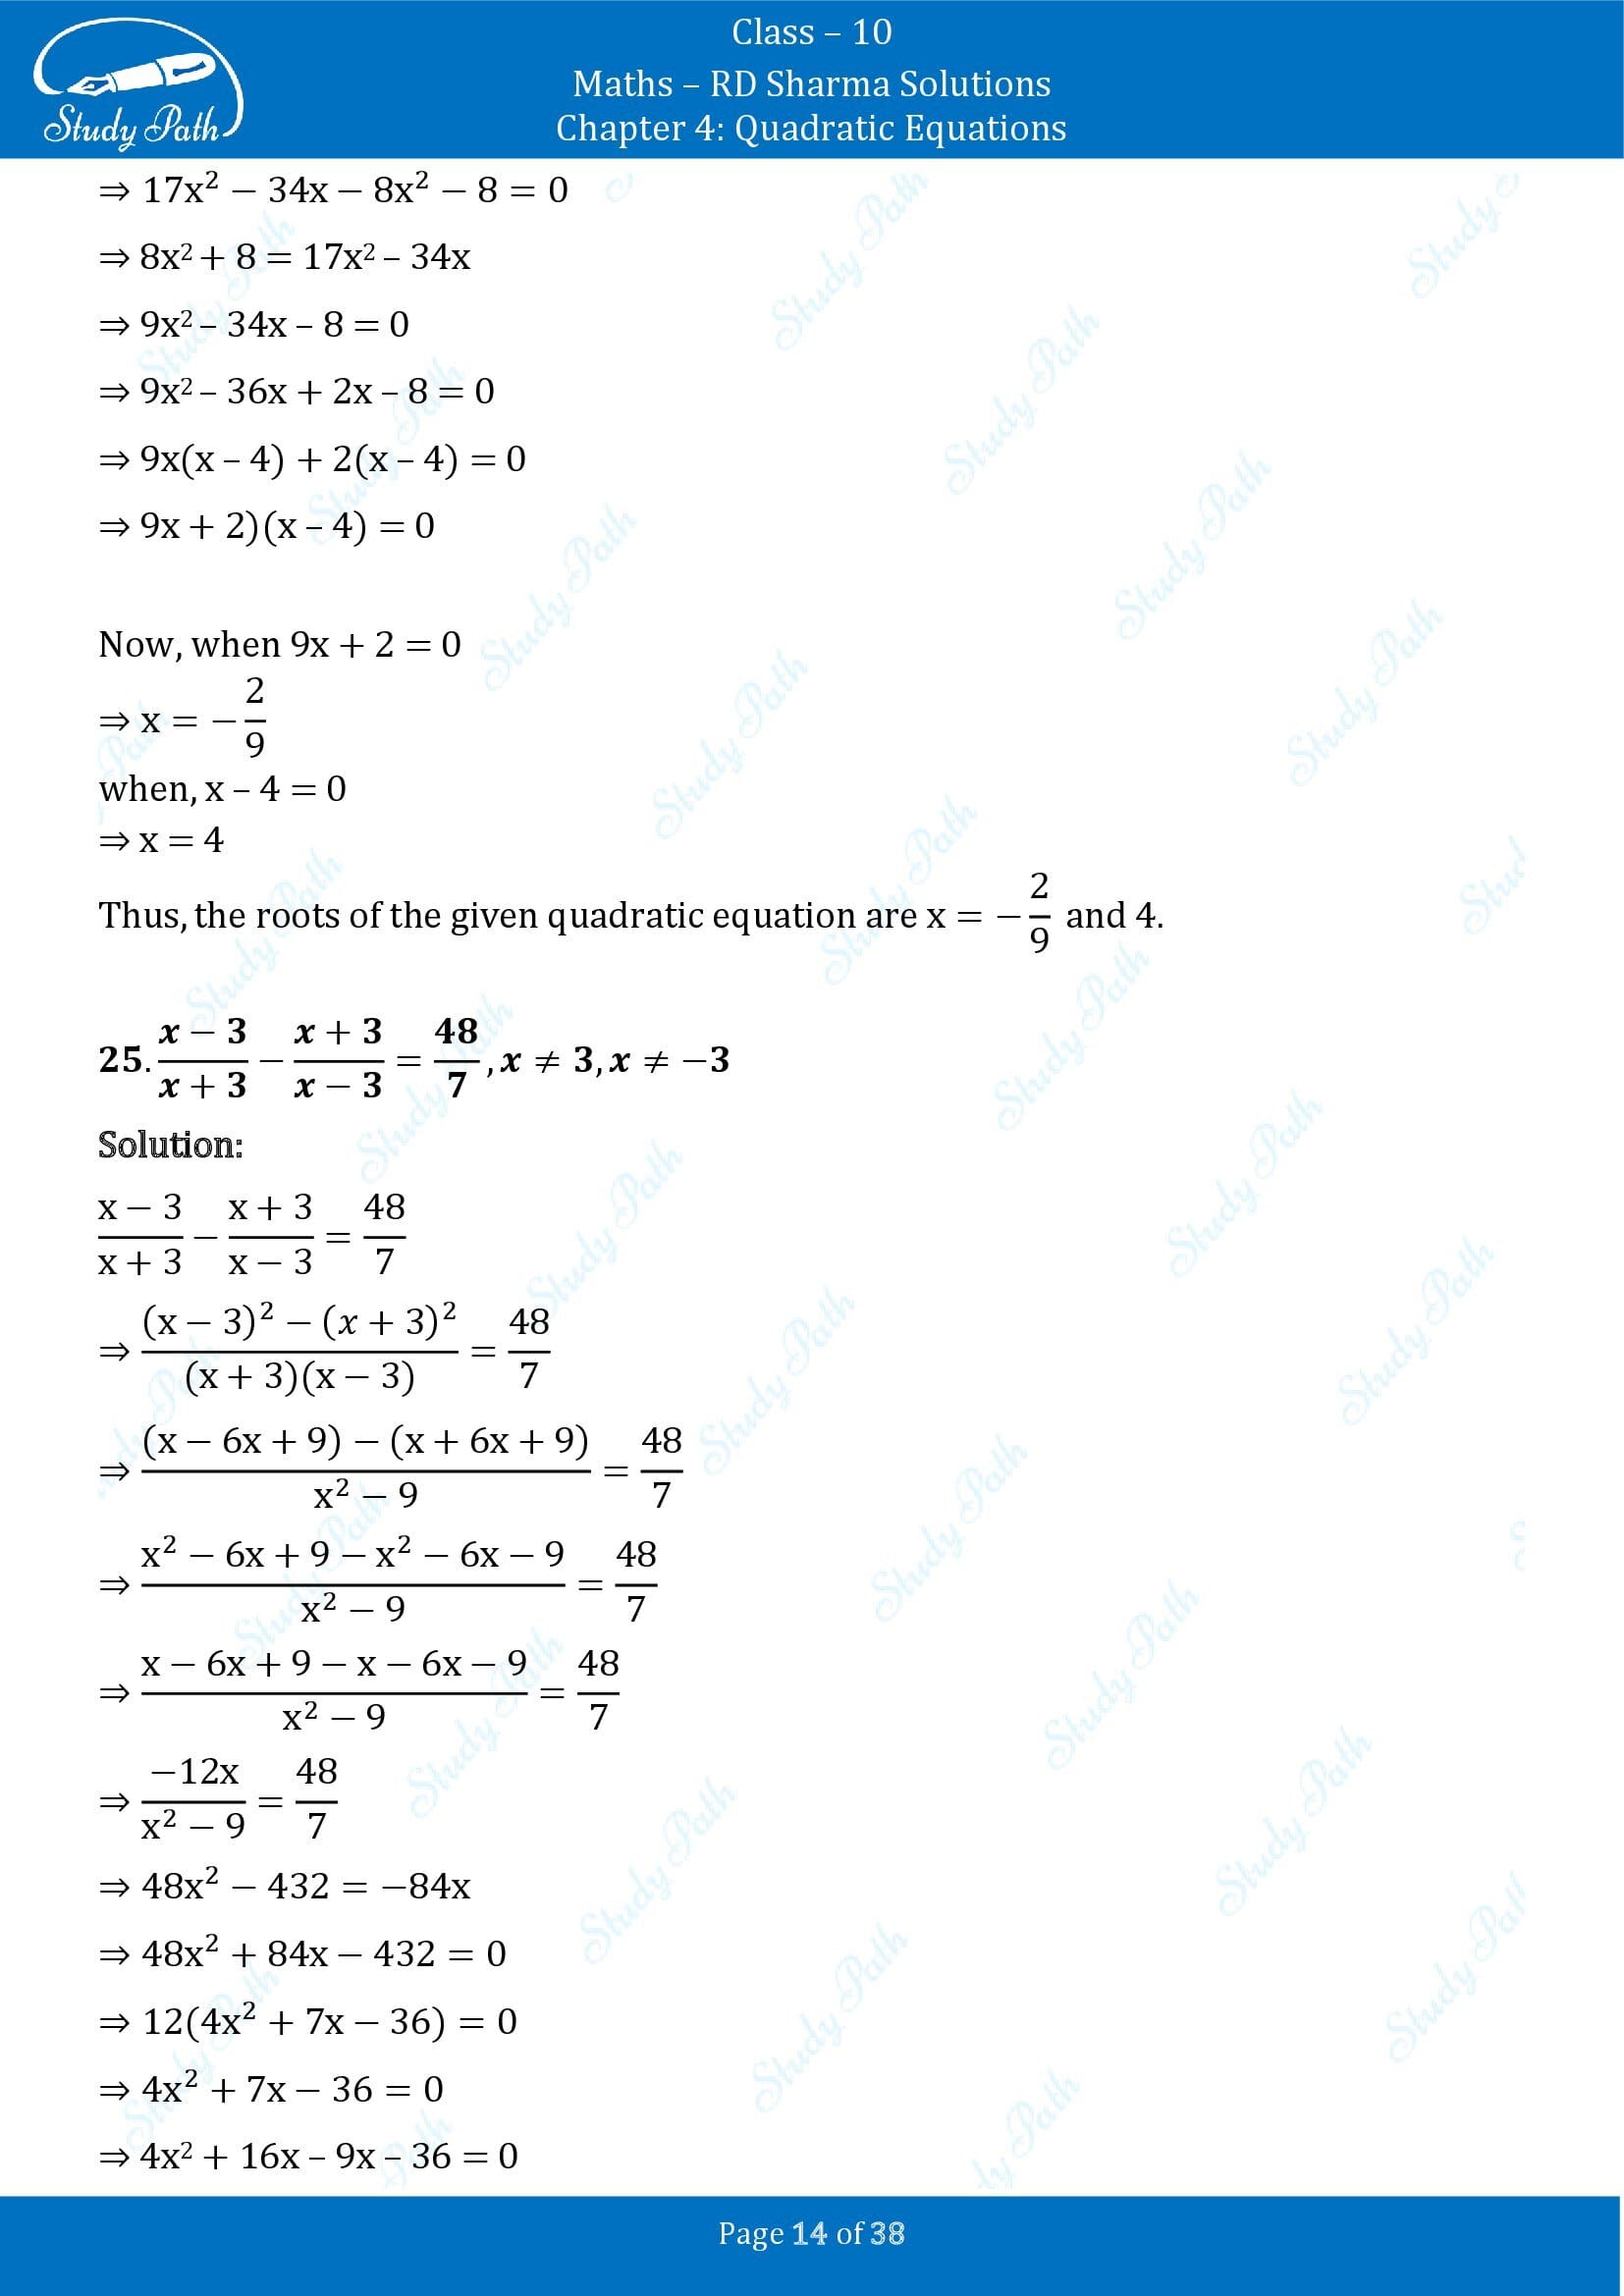 RD Sharma Solutions Class 10 Chapter 4 Quadratic Equations Exercise 4.3 00014